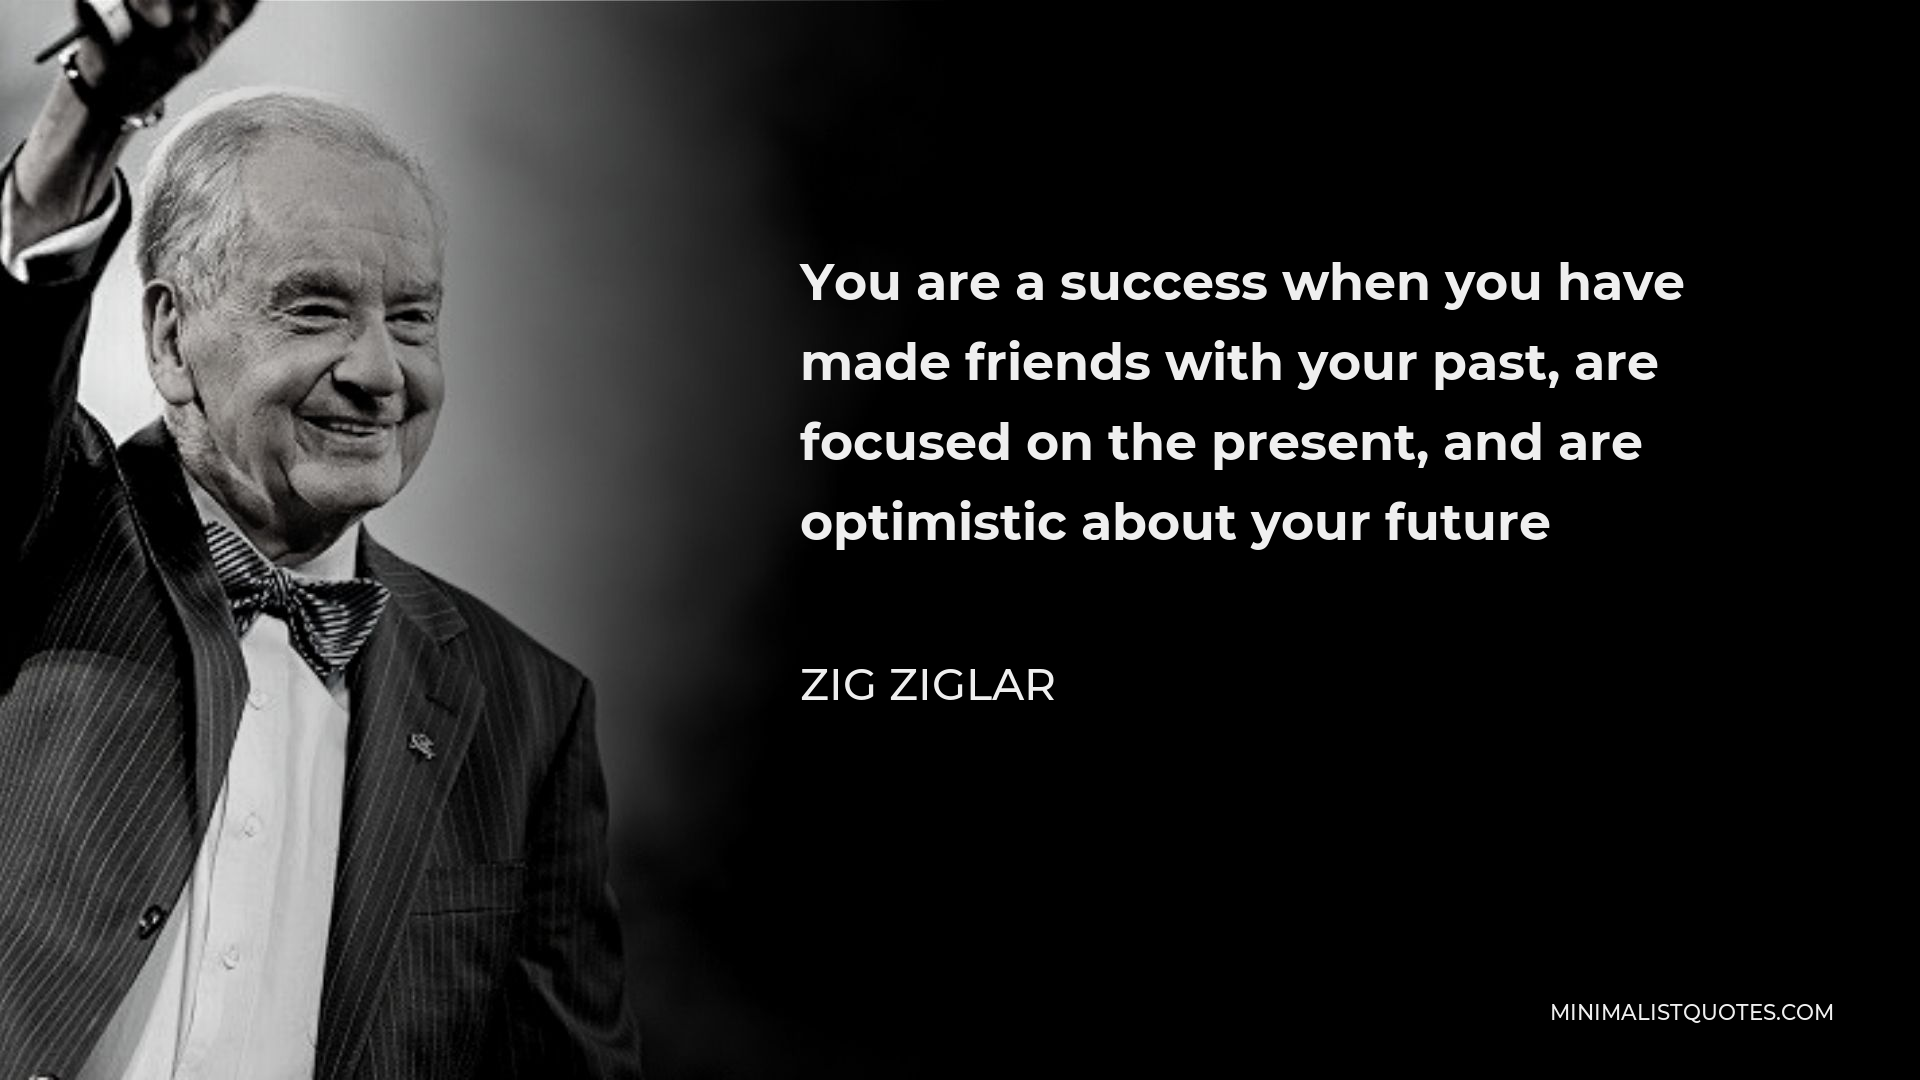 Zig Ziglar Quote - You are a success when you have made friends with your past, are focused on the present, and are optimistic about your future